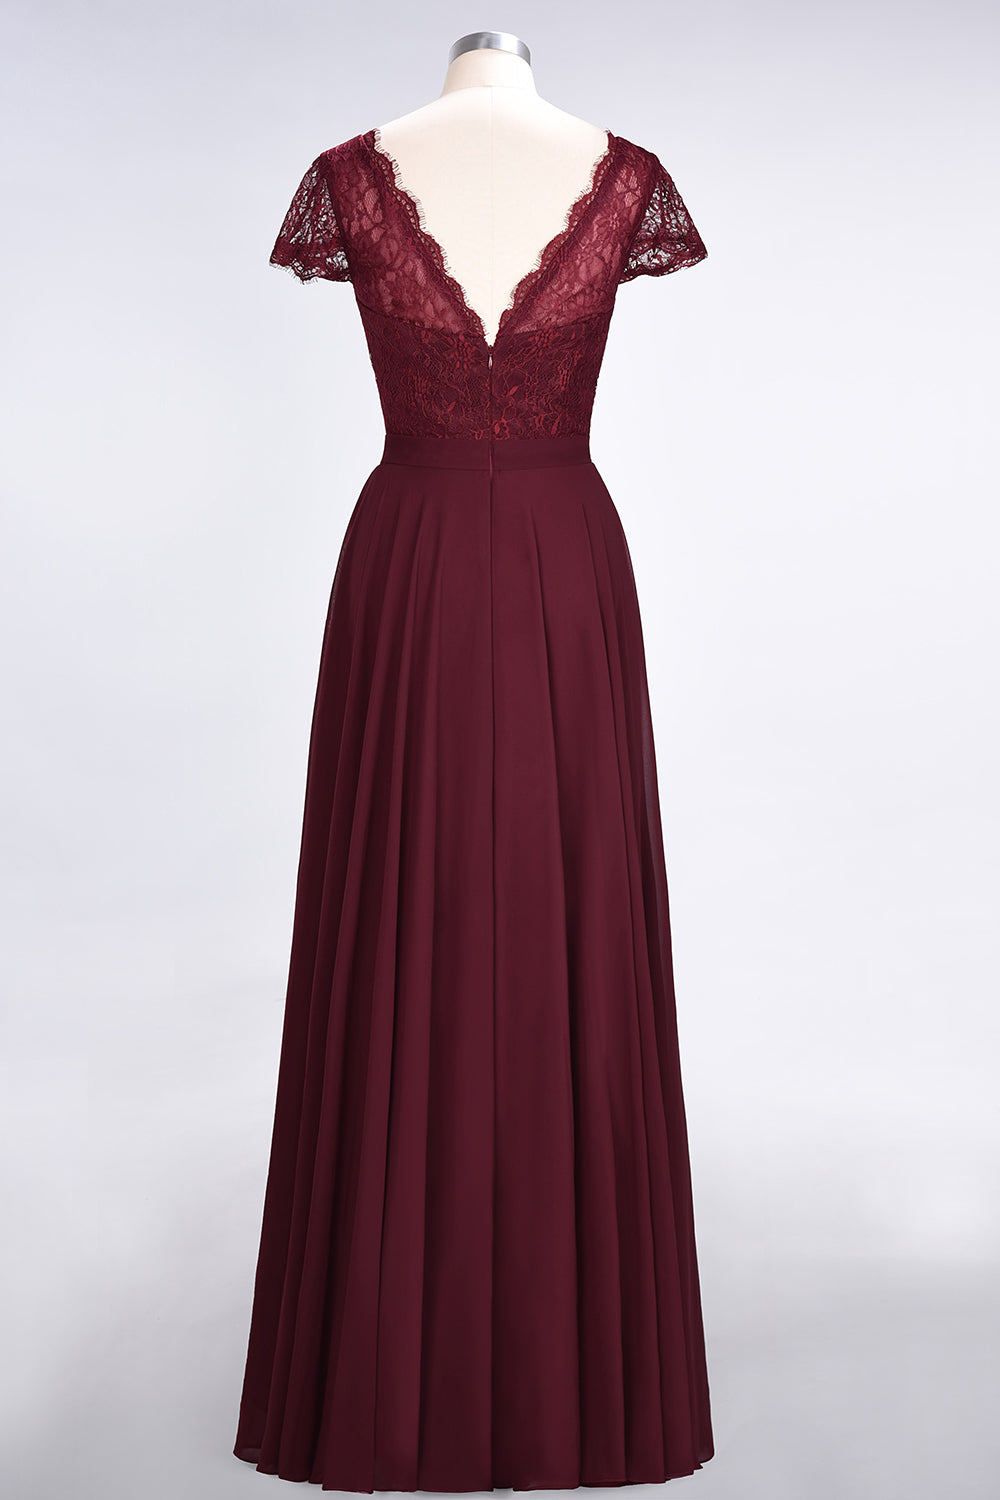 A-Line Chiffon Lace V-Neck Long Bridesmaid Dress with Sleeves-BIZTUNNEL